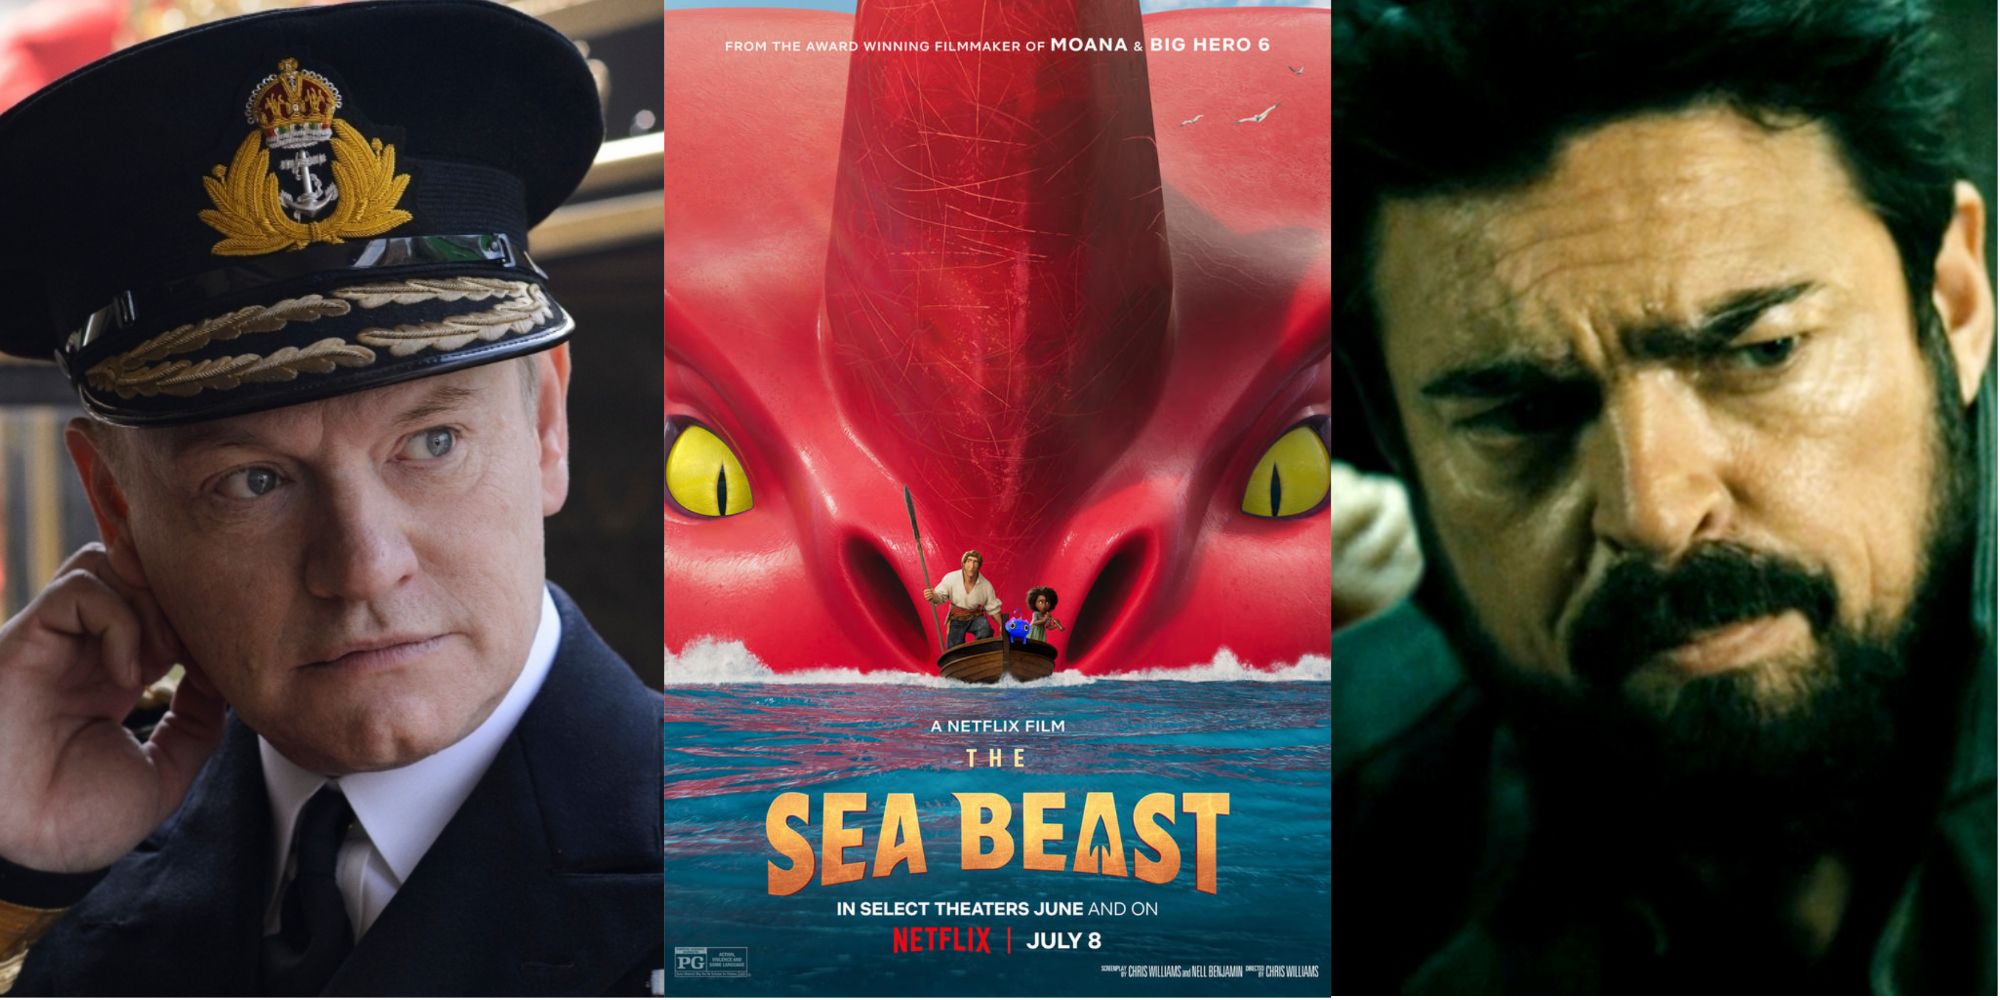 A split image of Karl Urban, Jared Harris, and the Sea Beast poster.